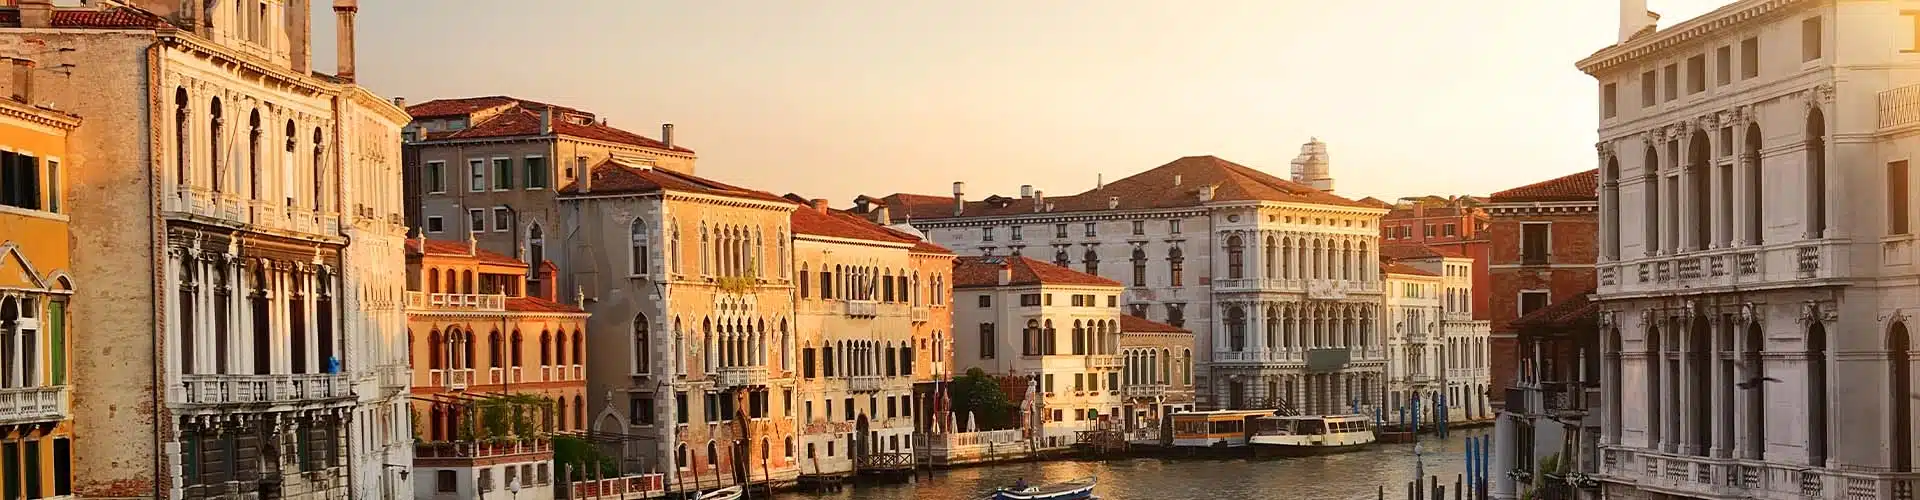 View of a canal in Venice at sunset